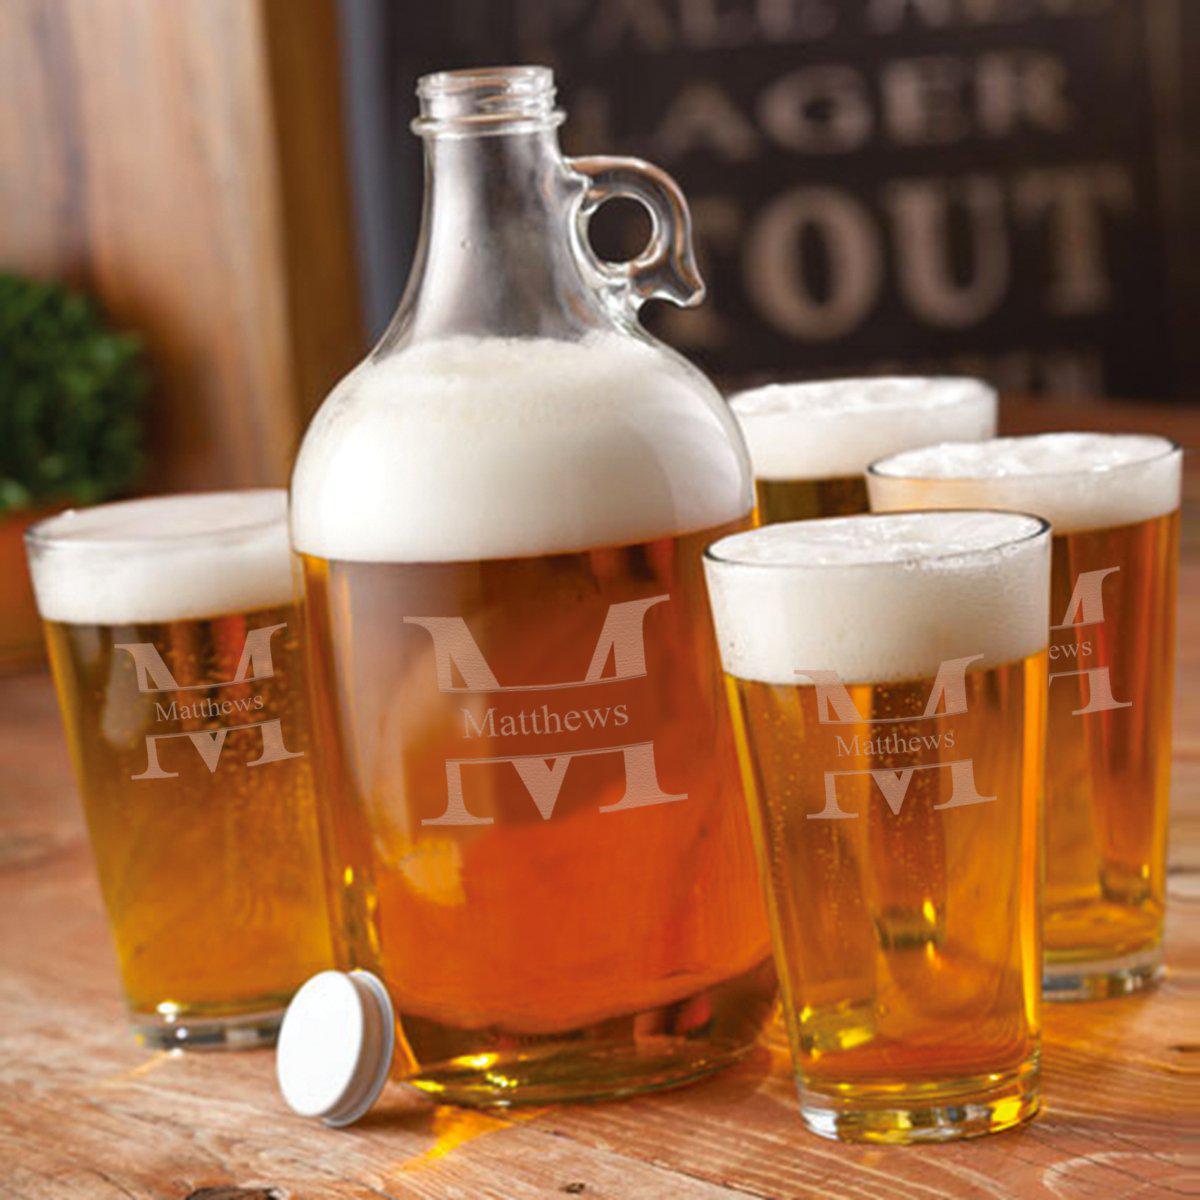 64 oz. Personalized Growler Set with 2 Pub Glasses